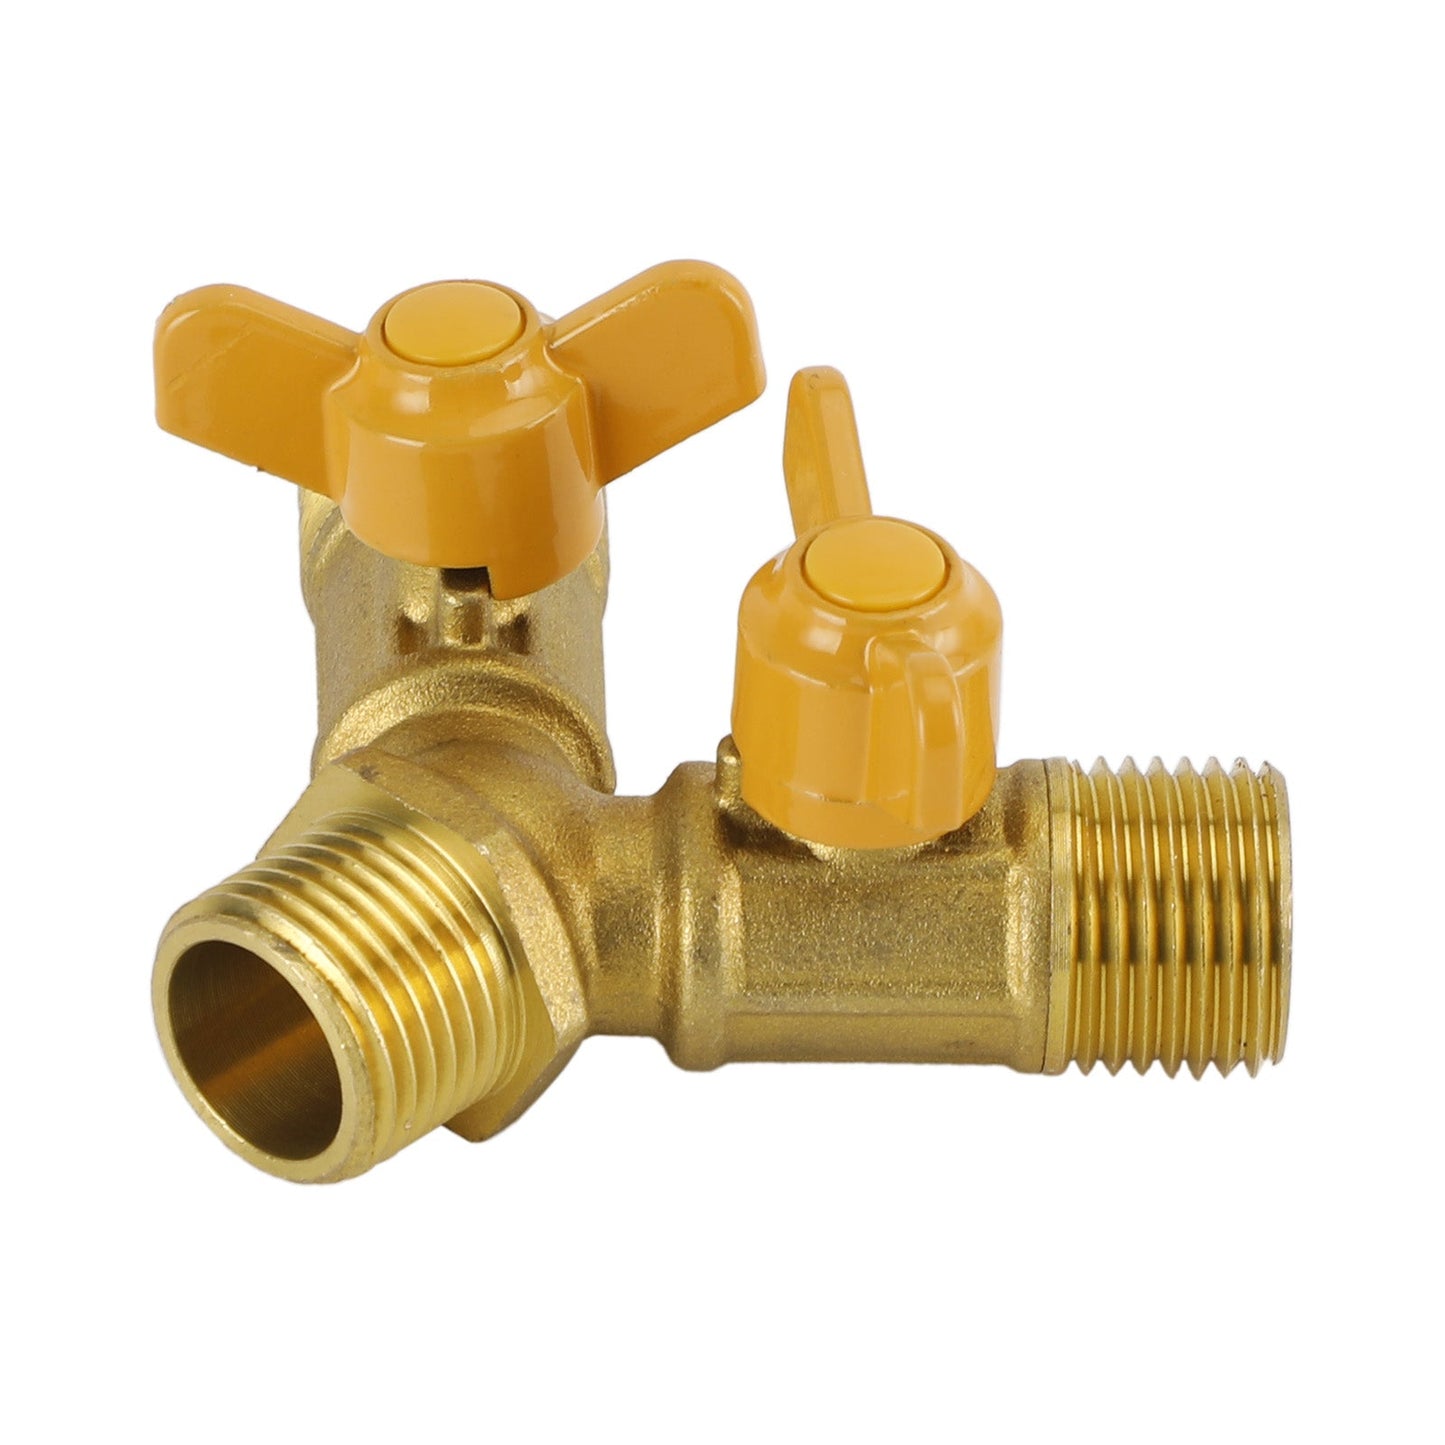 3 Way Shut off Ball Valve 1/2" Hose Barb Y Shaped Valve 2 Switch Brass Fitting